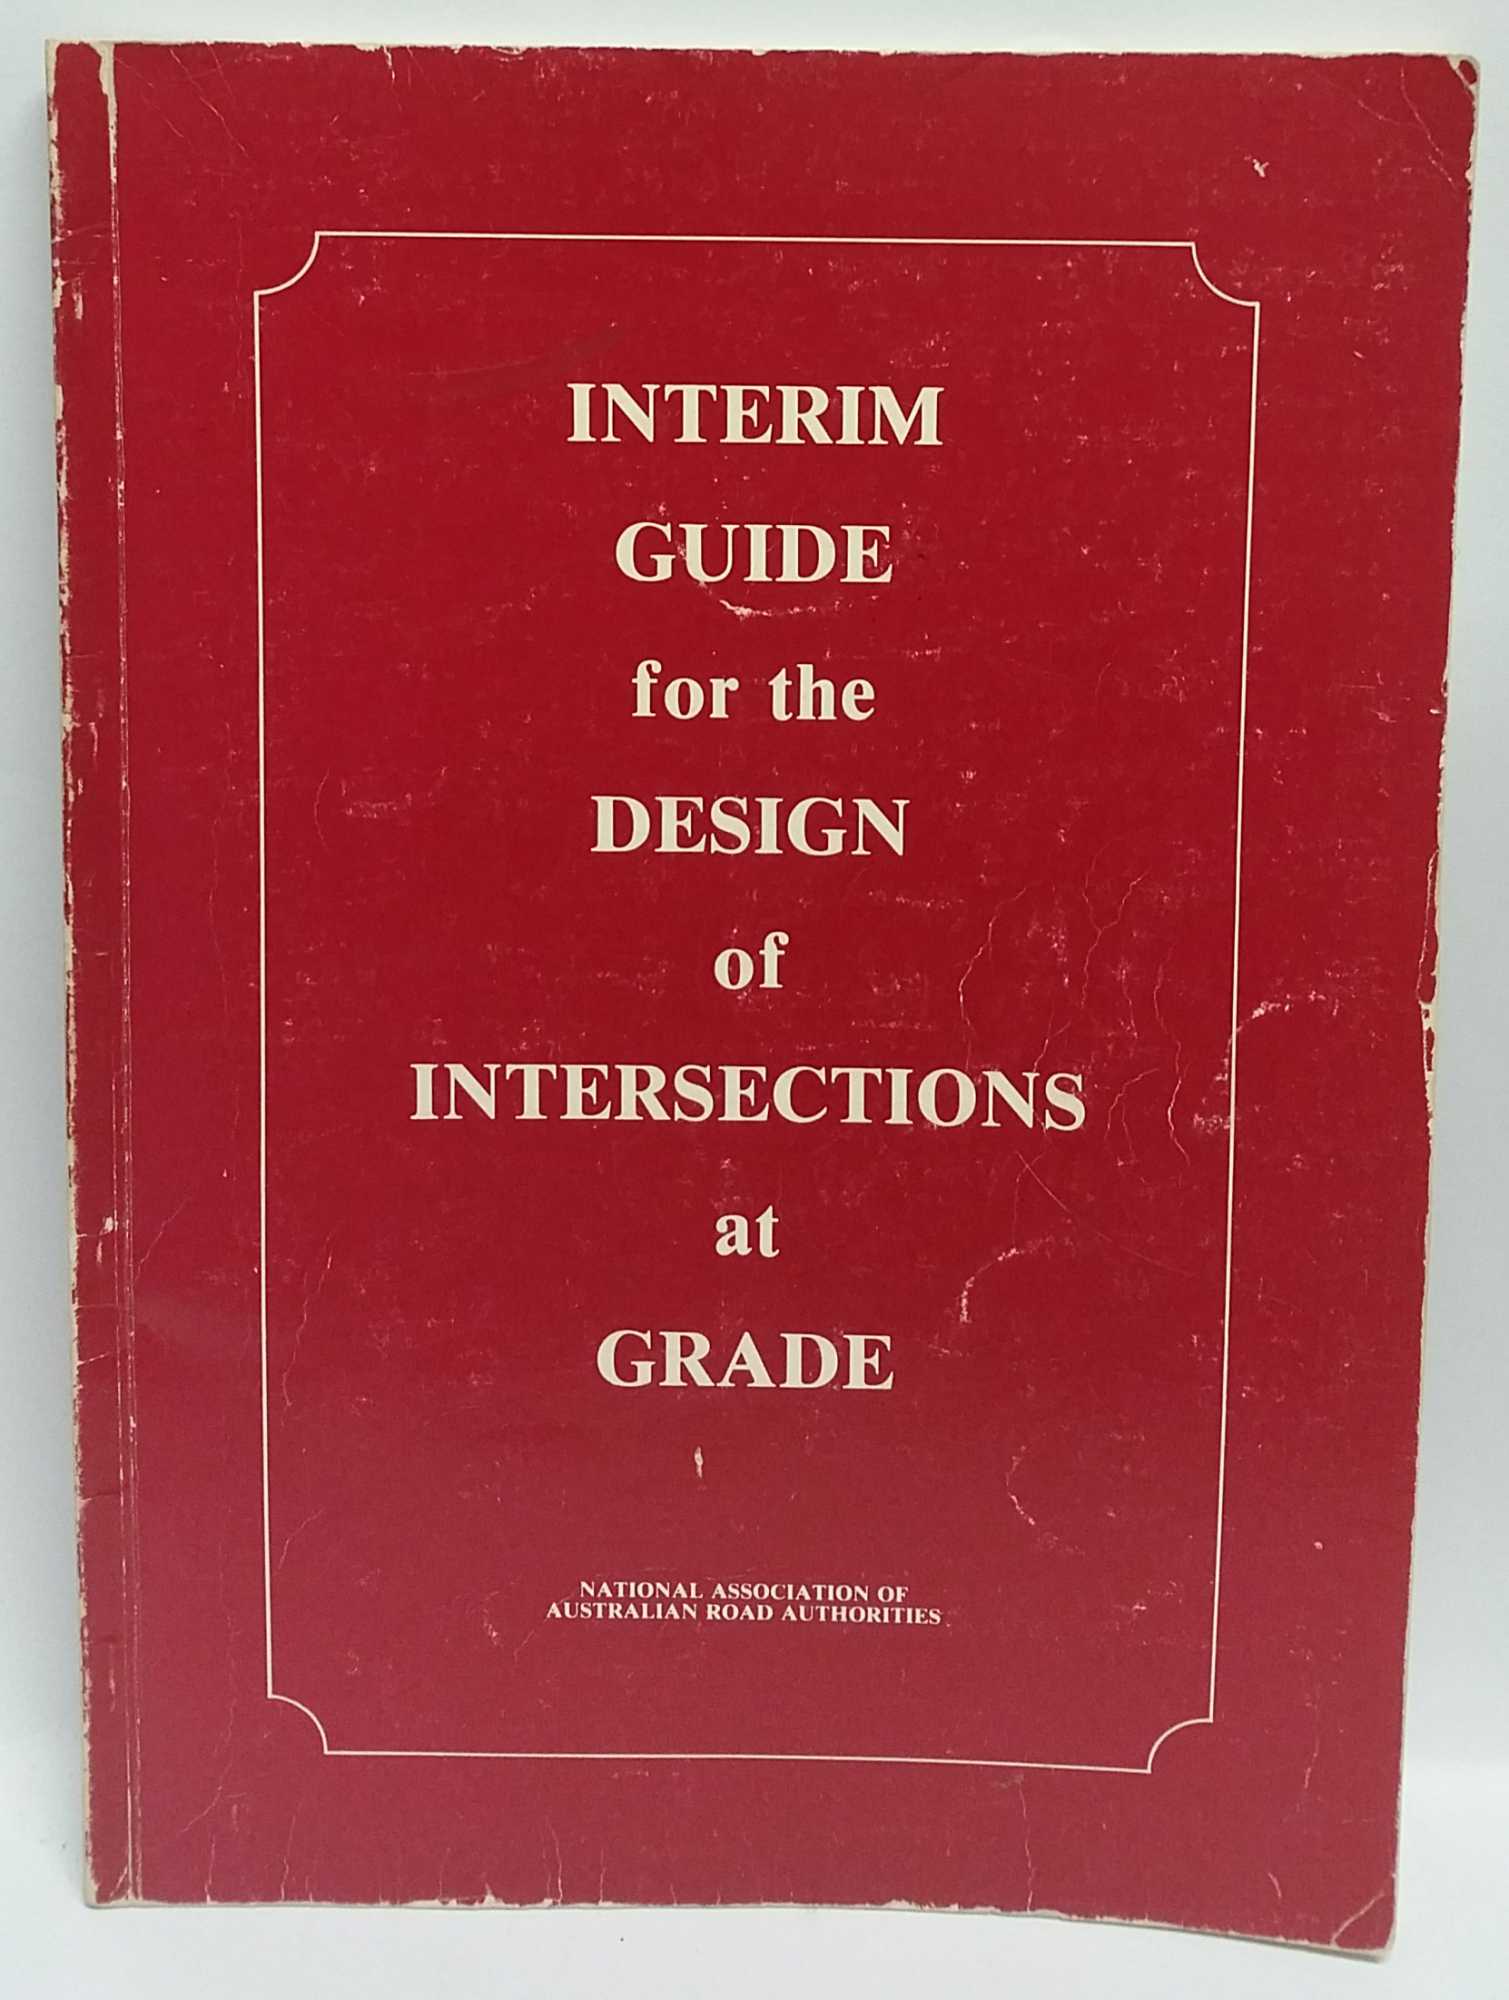 National Association Of Australian Road Authorities - Interim Guide for the Design of Intersections at Grade